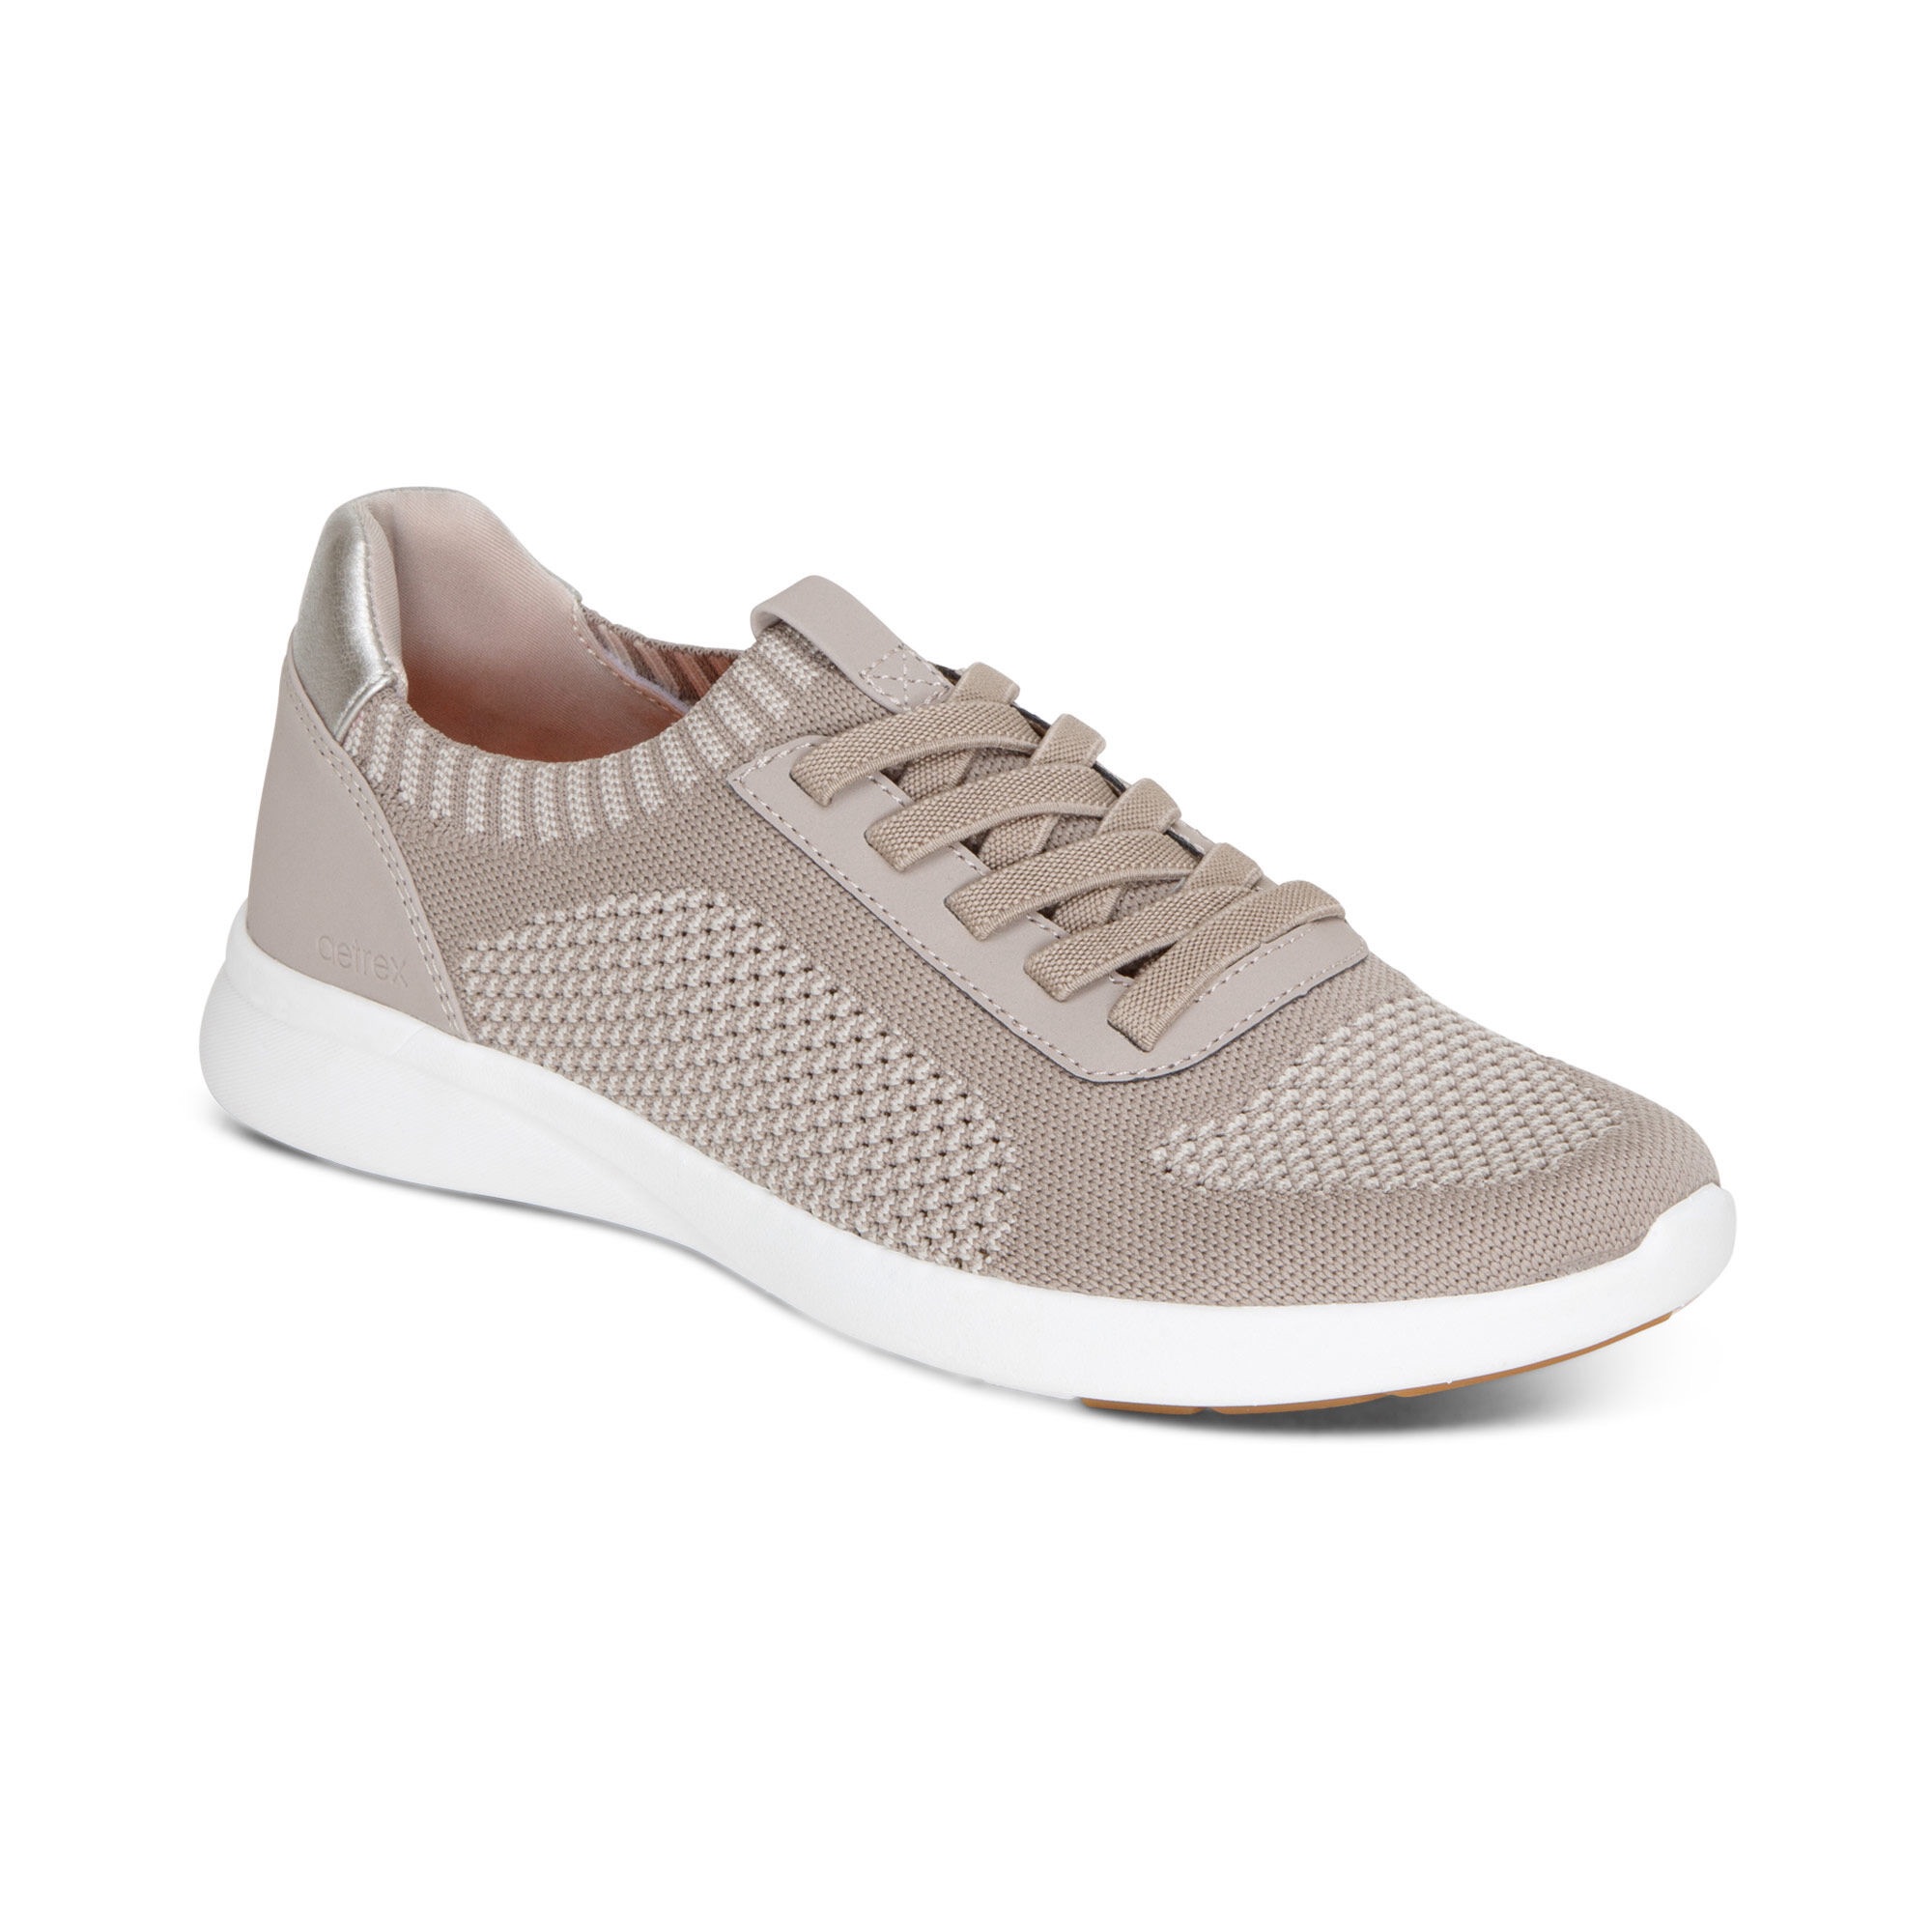 Teagan Arch Support Sneakers-Oatmeal